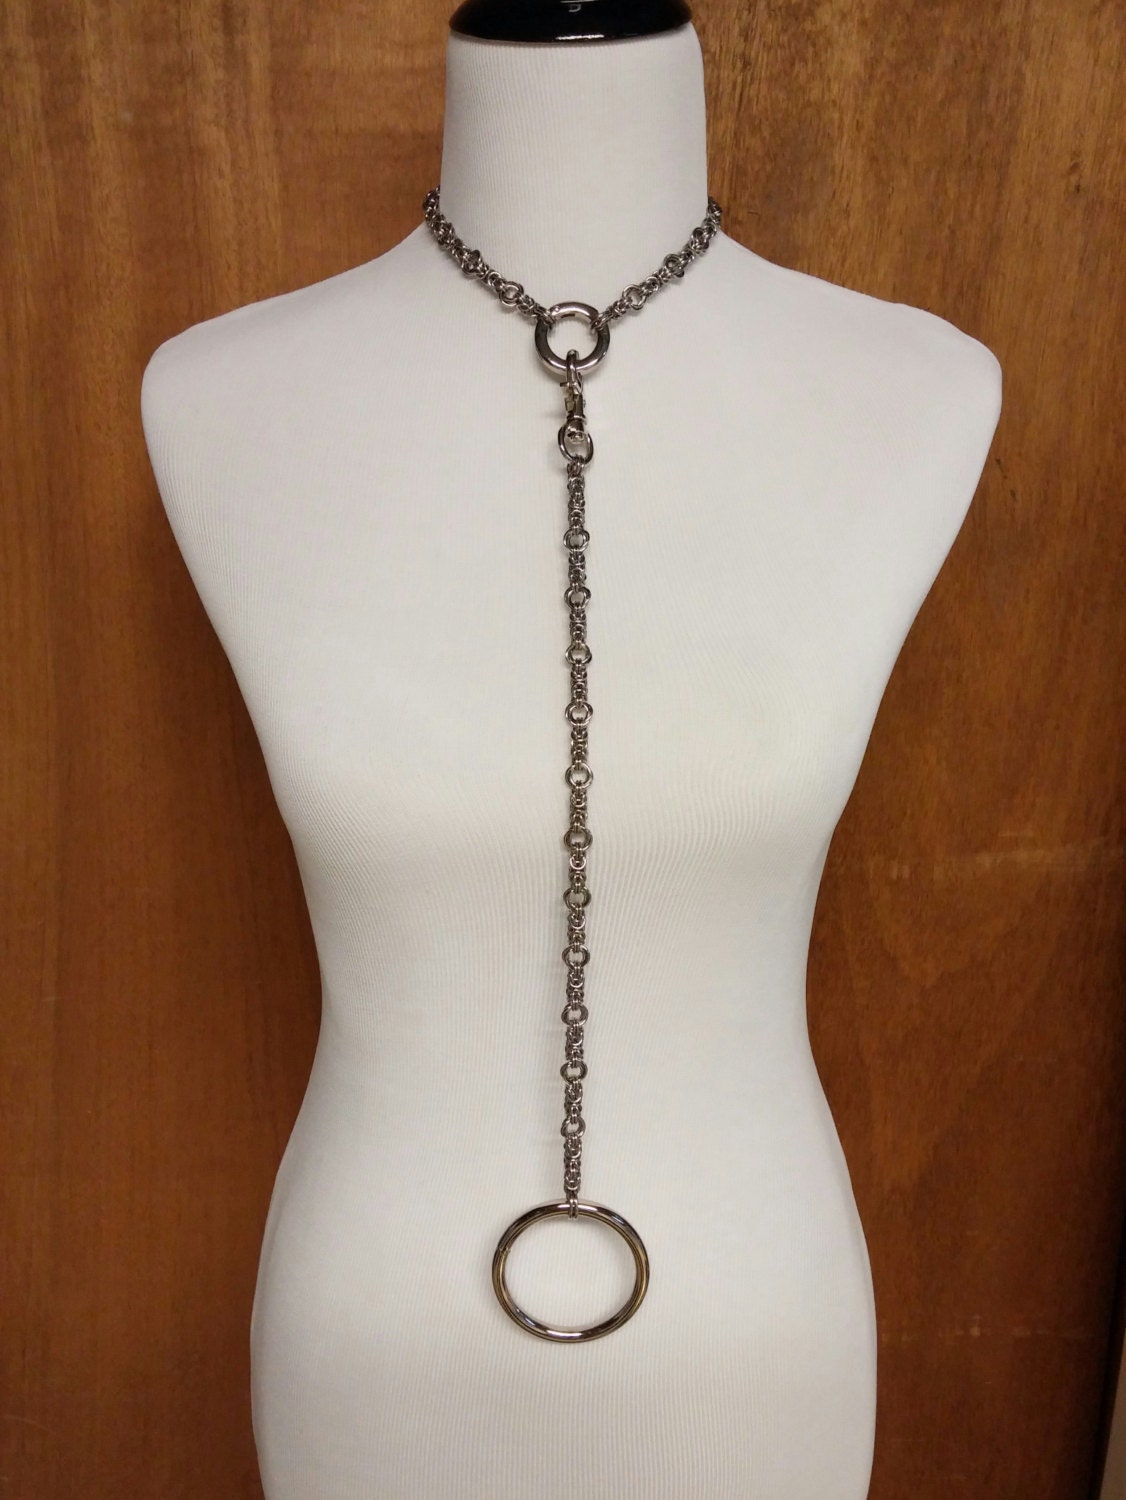 Stainless Steel Bdsm Slave Collar And Leash Set By Thecagedflower